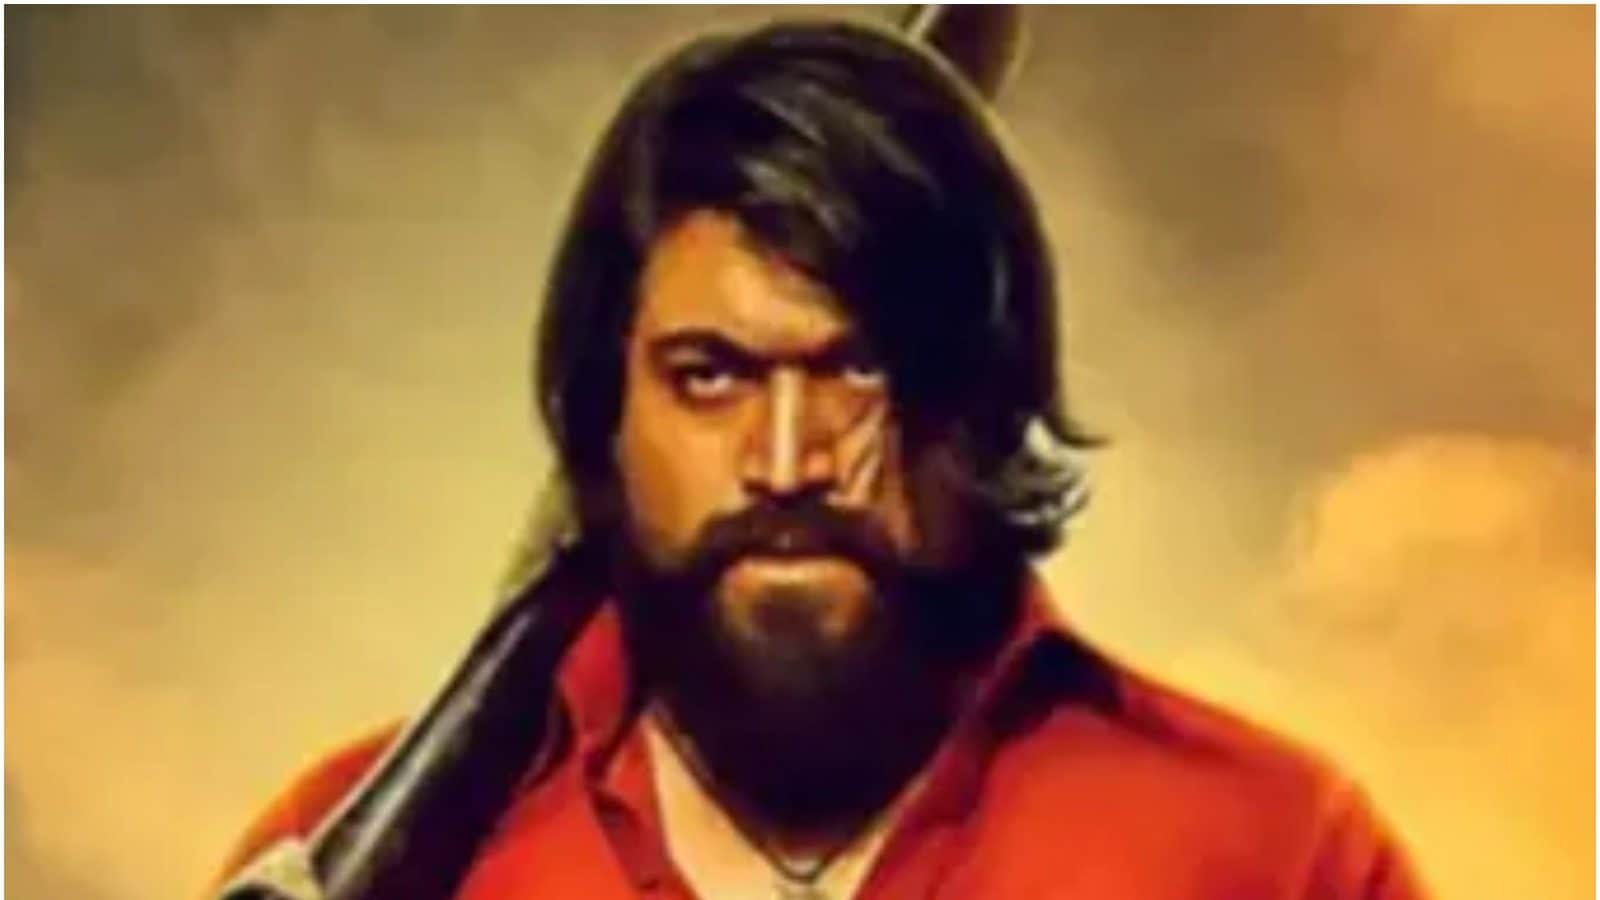 Inspiring Journey of KGF Star Yash: From Theatre Actor To Kannada Film Star